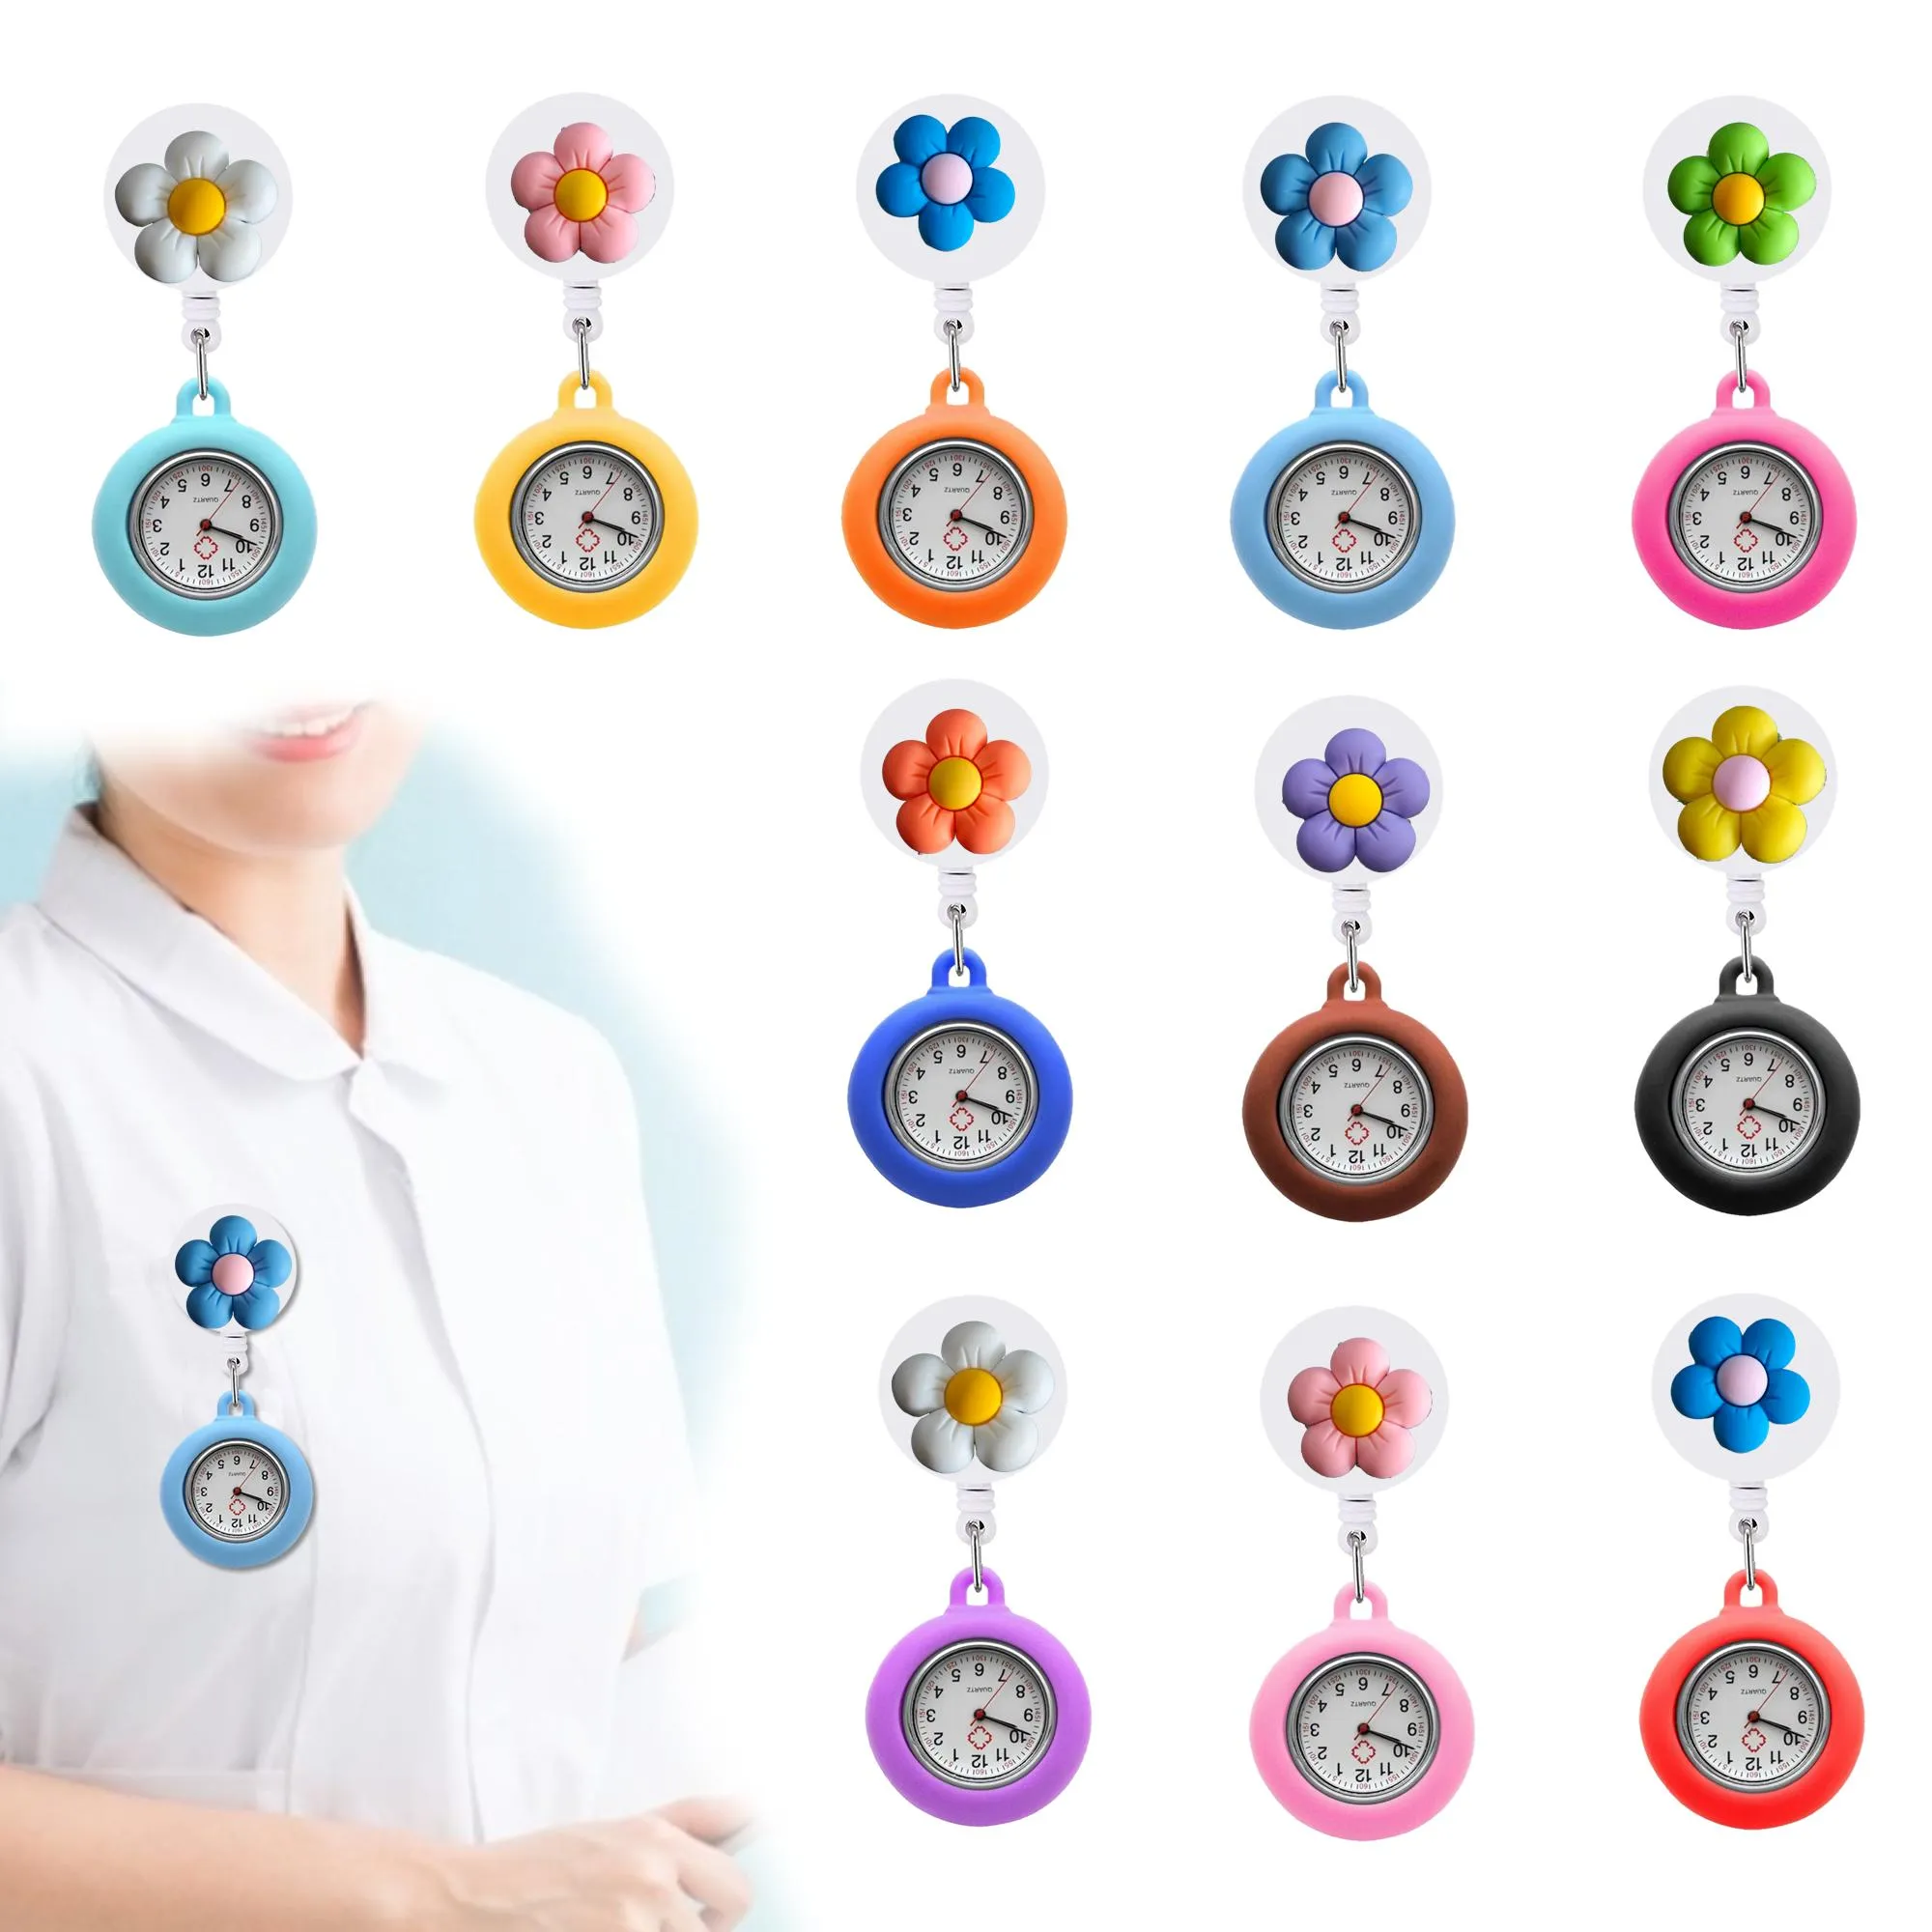 Other Watches Floret Clip Pocket Retractable Digital Fob Clock Gift Brooch For Medical Workers Nurse Watch On Quartz With Second Hand Otcws